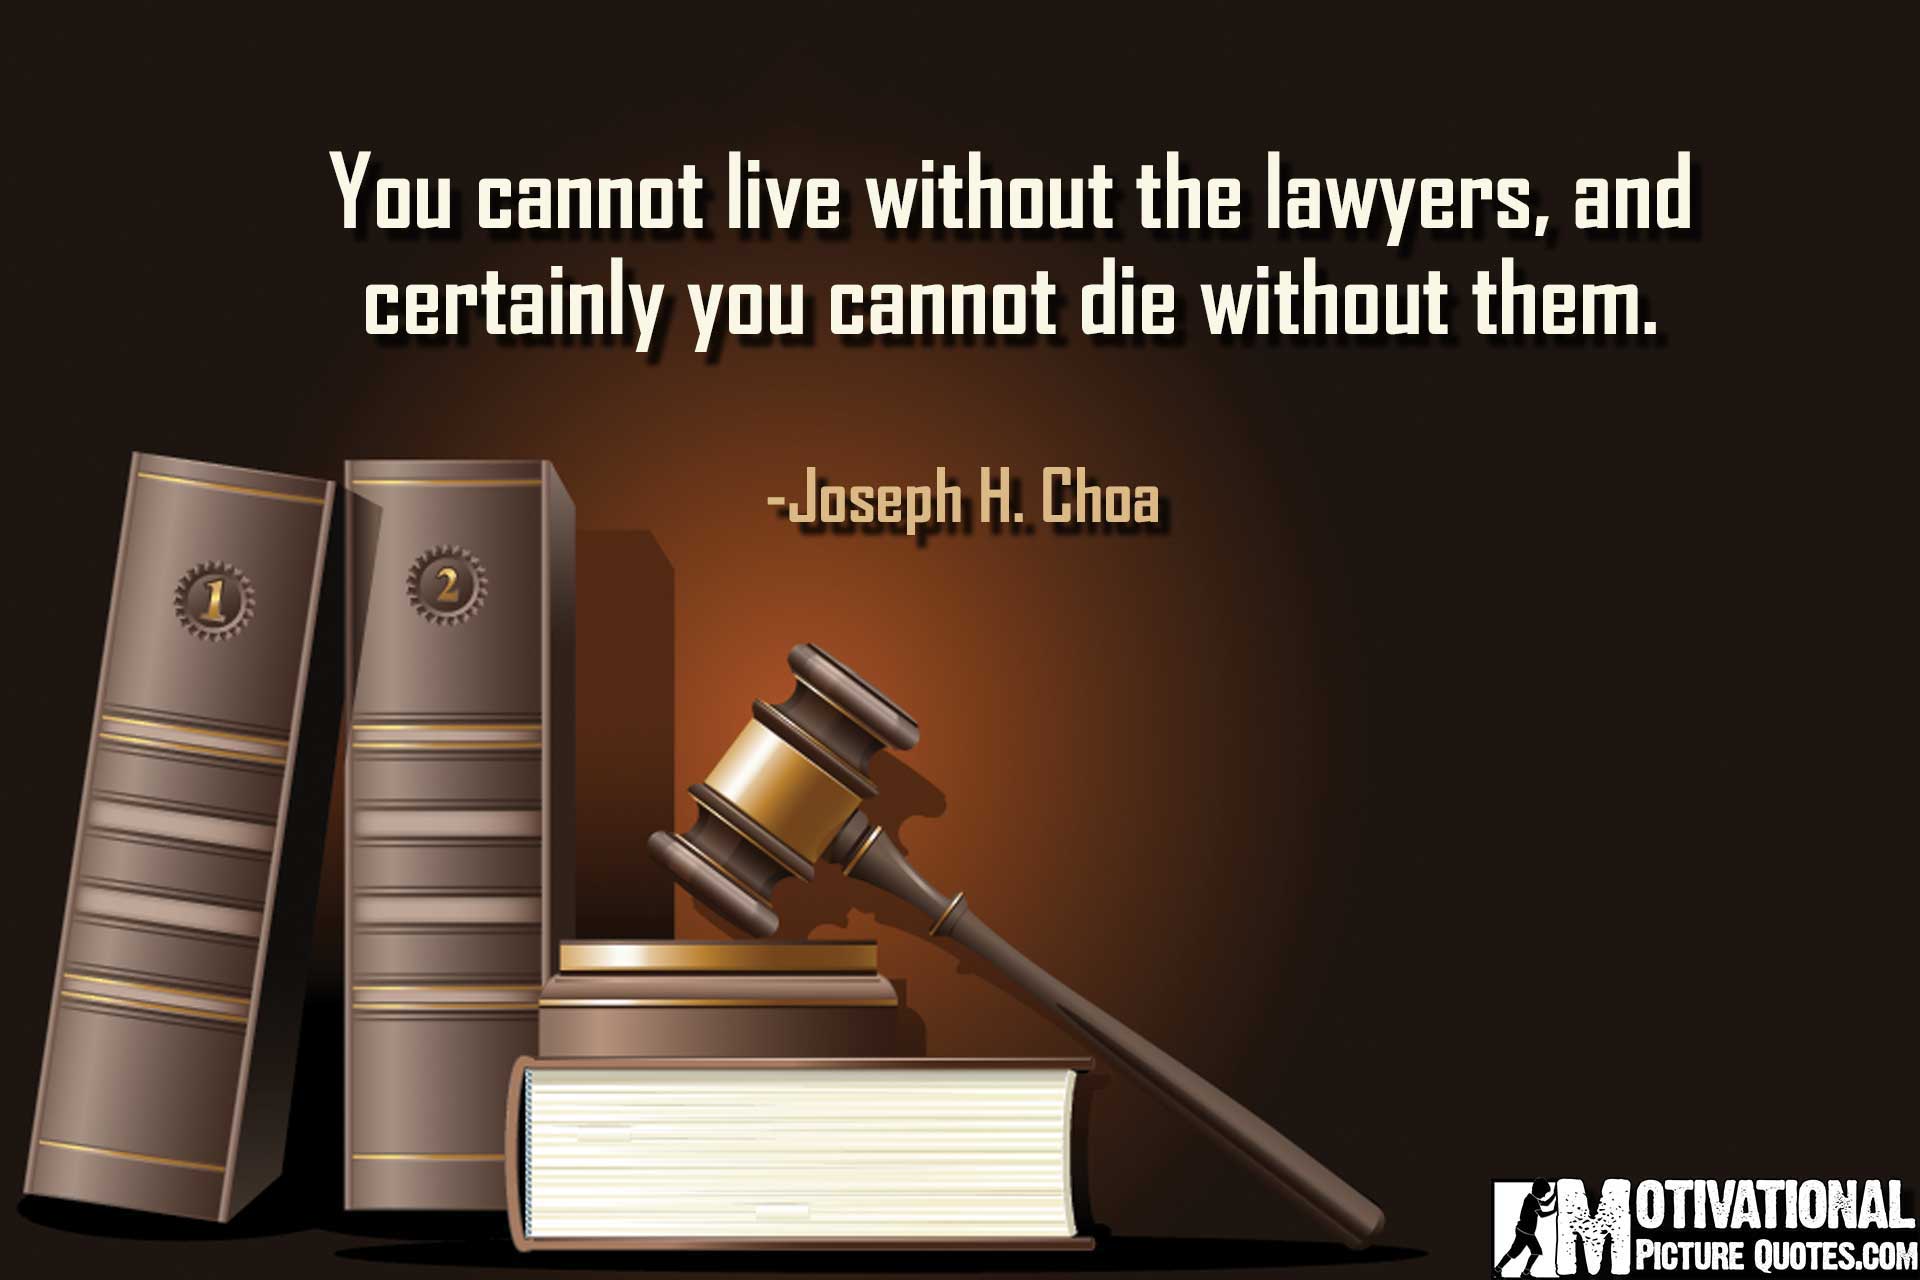 Inspirational Quotes for Law Students. Lawyers Quotes Image